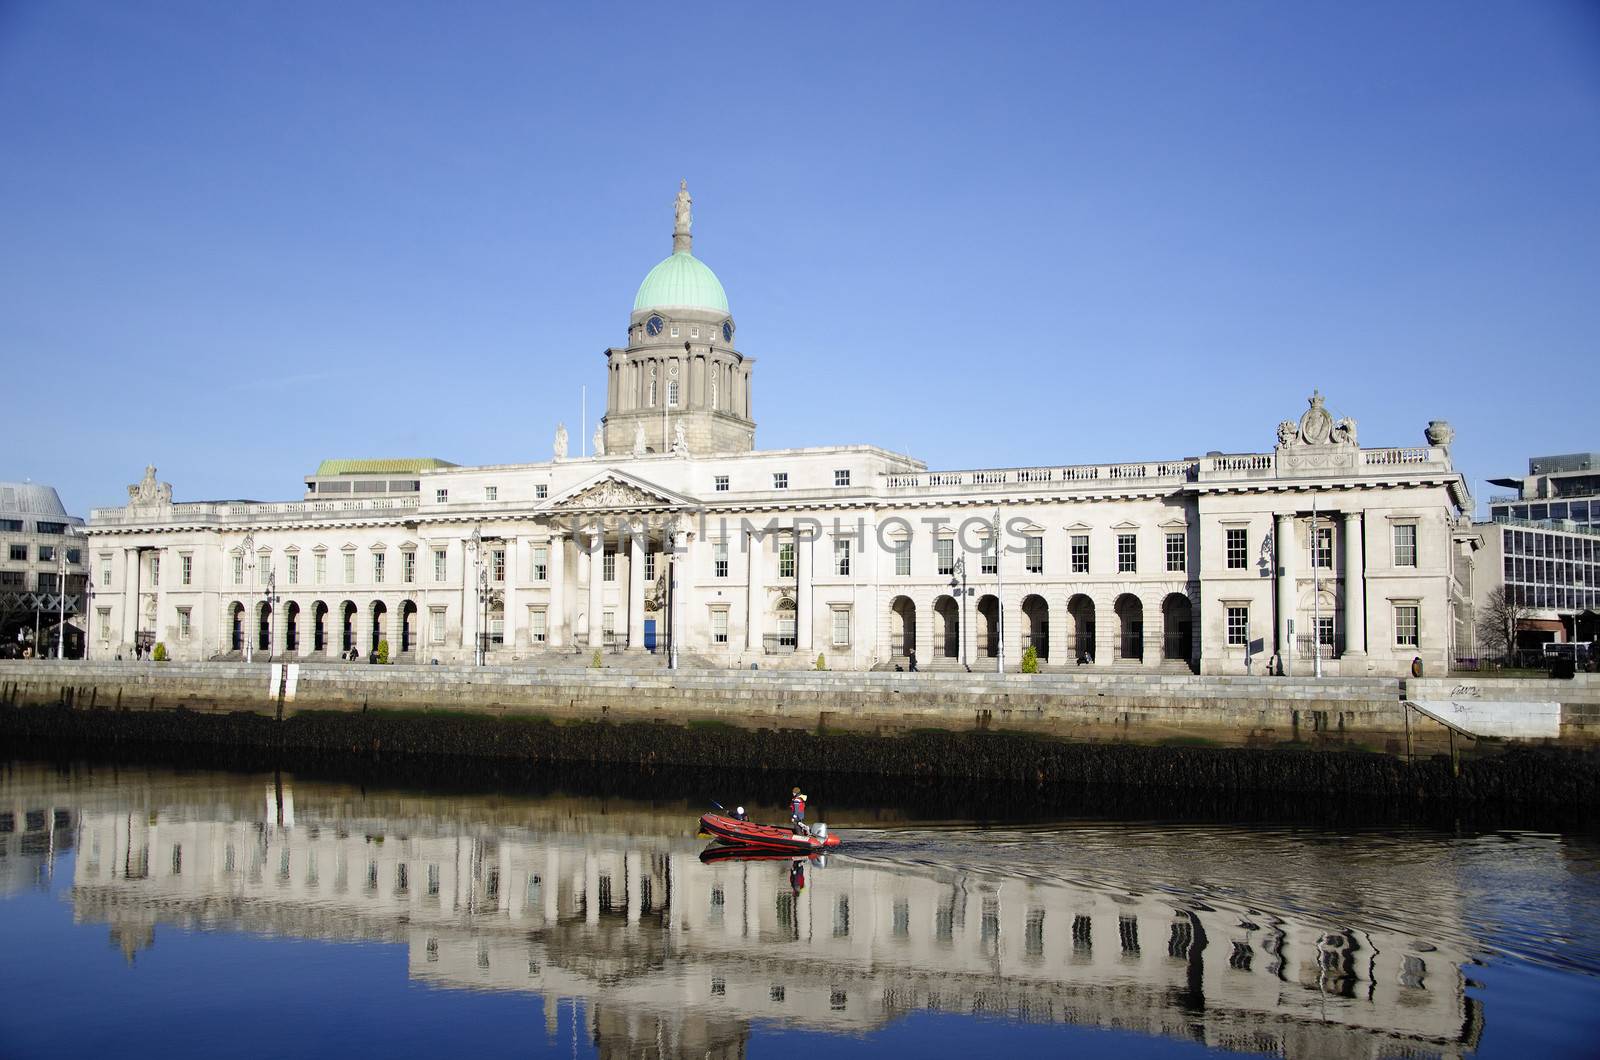 The Custom House is a neoclassical 18th century building in Dublin, Ireland. Which houses the Department of the Environment, Community and Local Government. It is located on the north bank of the River Liffey.